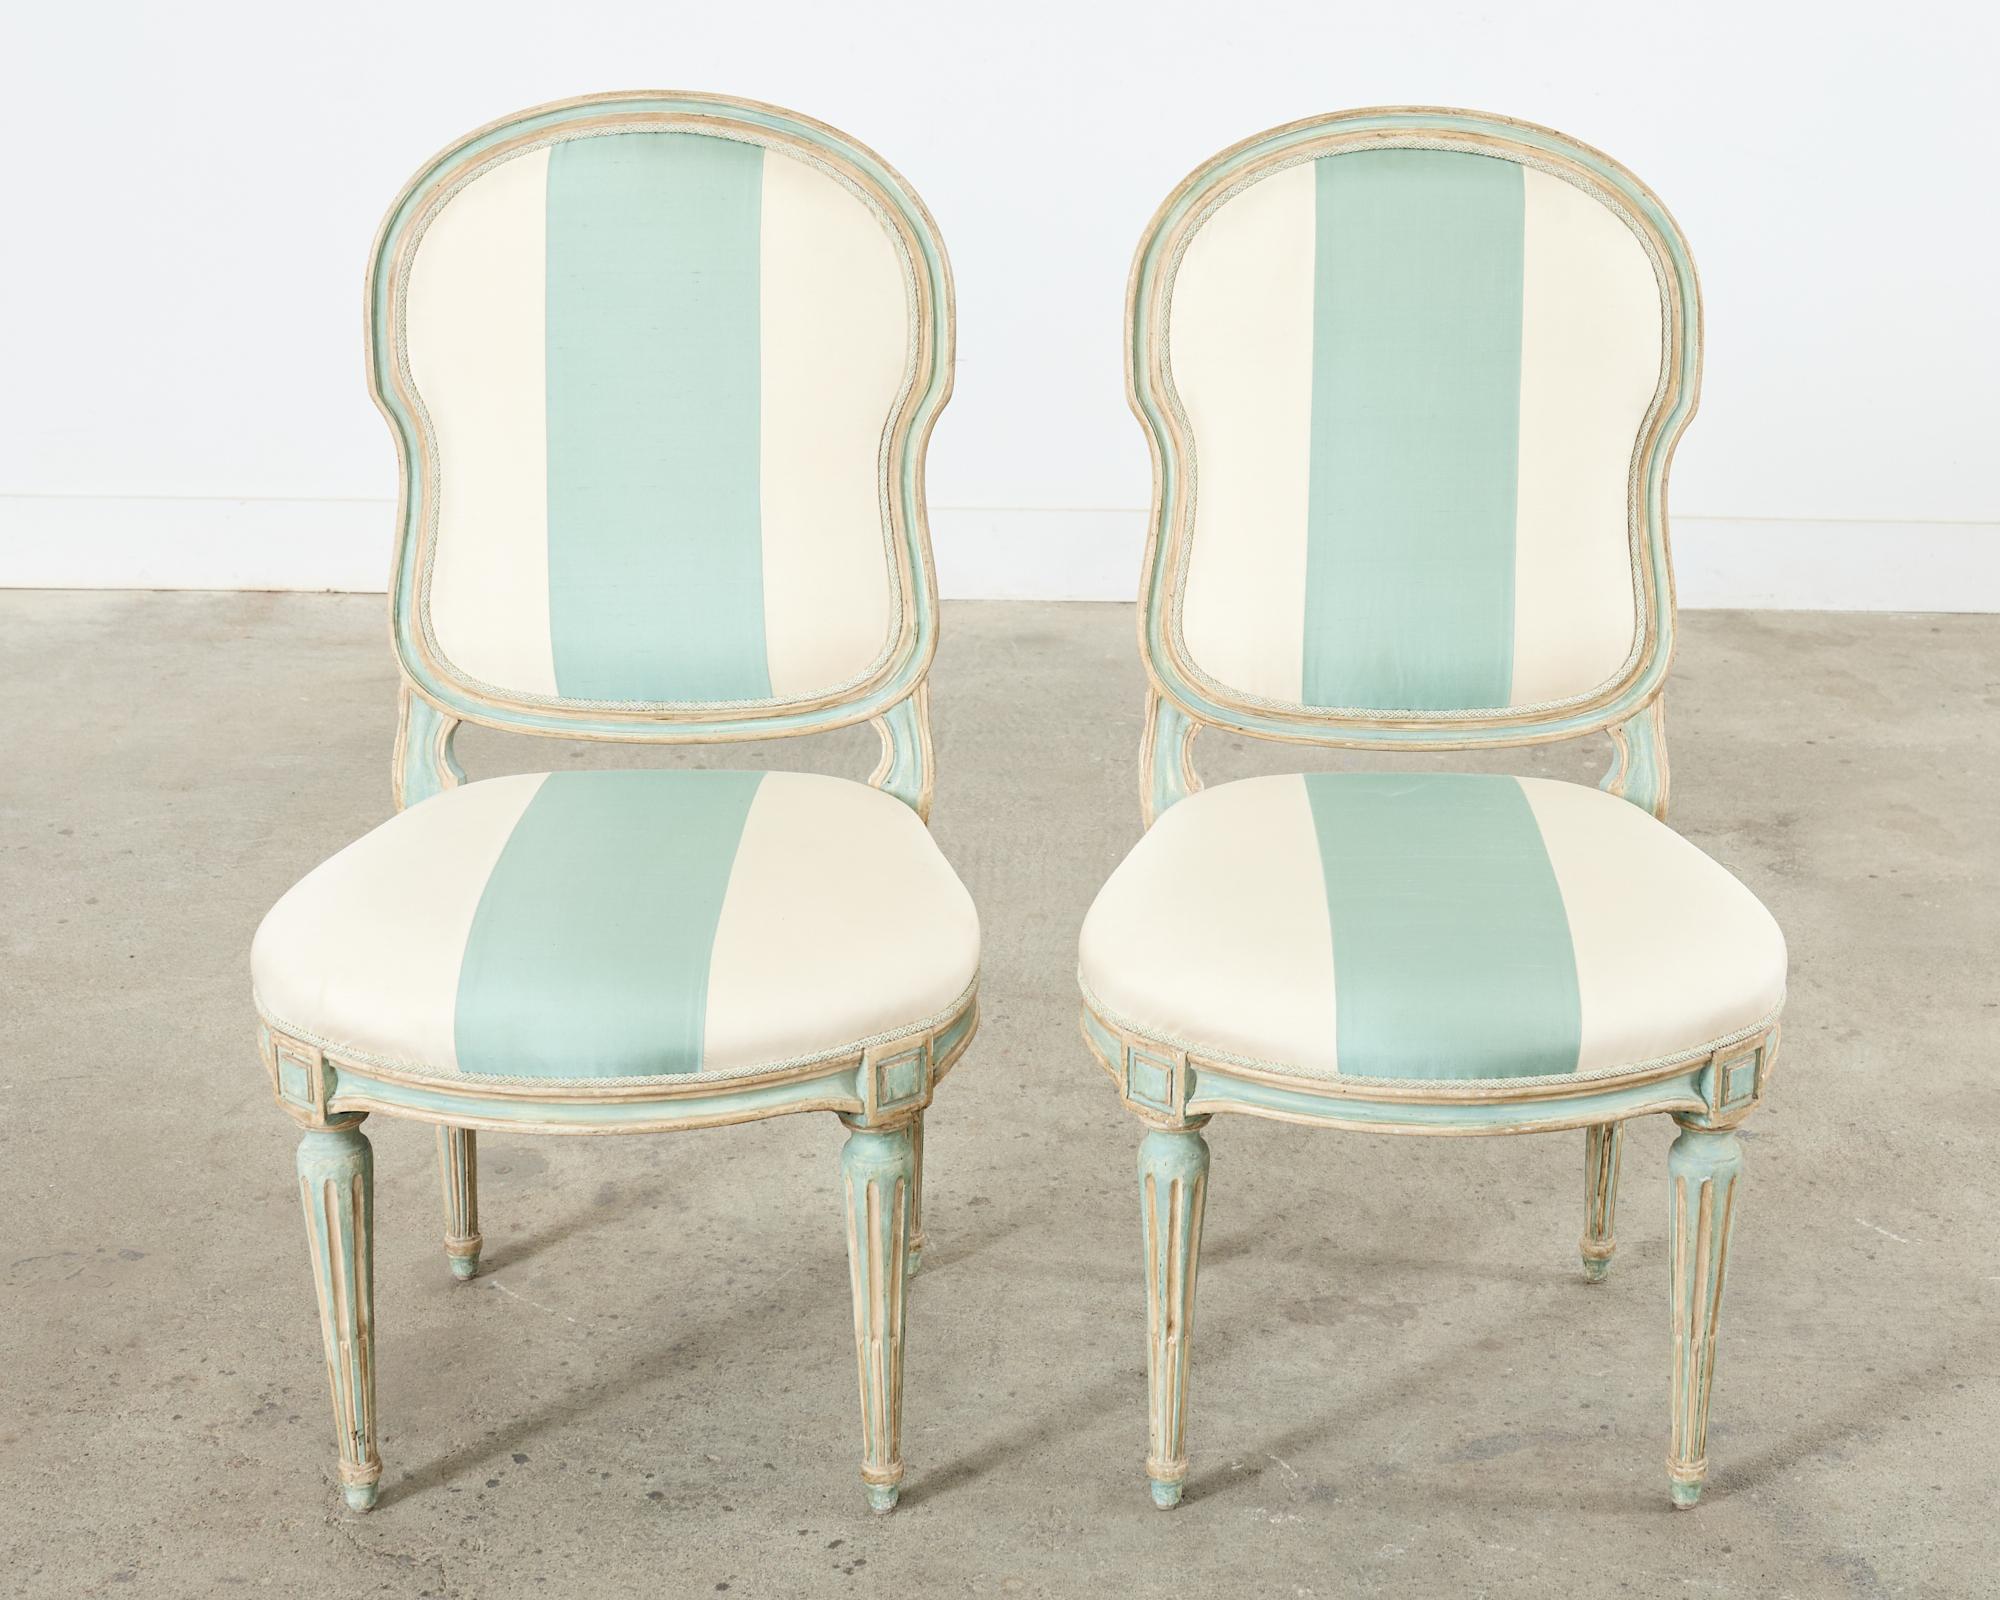 Pair of Dennis & Leen Louis XVI Style Painted Dining Chairs  In Good Condition For Sale In Rio Vista, CA